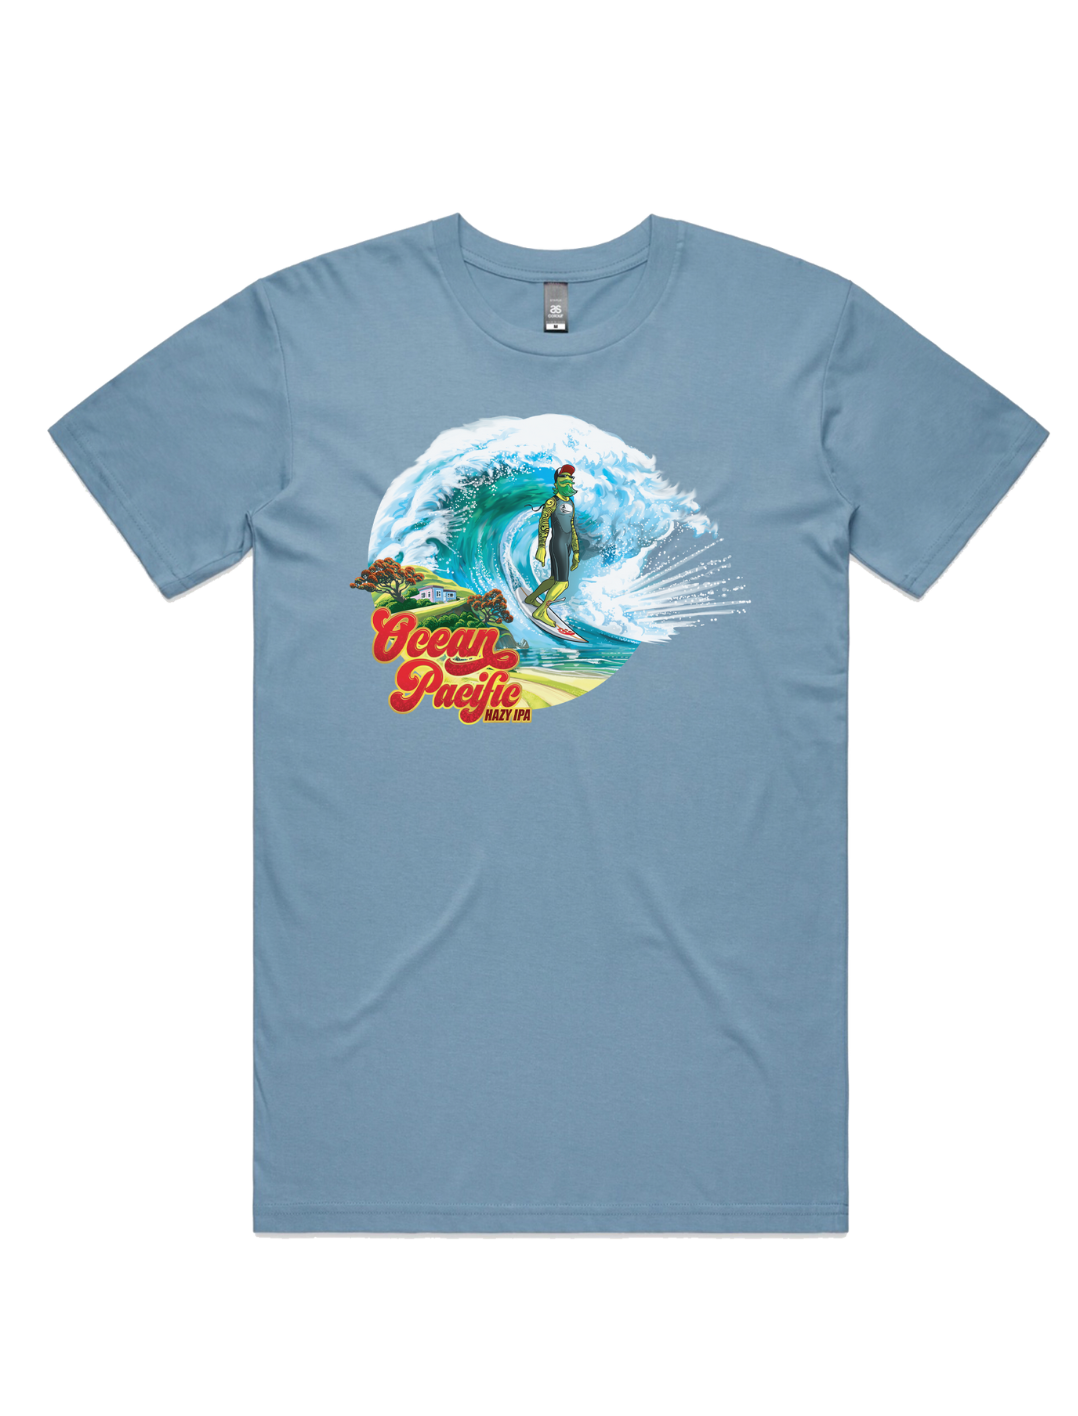 Bach Brewing Mens T-shirt - Ocean Pacific (front graphic)